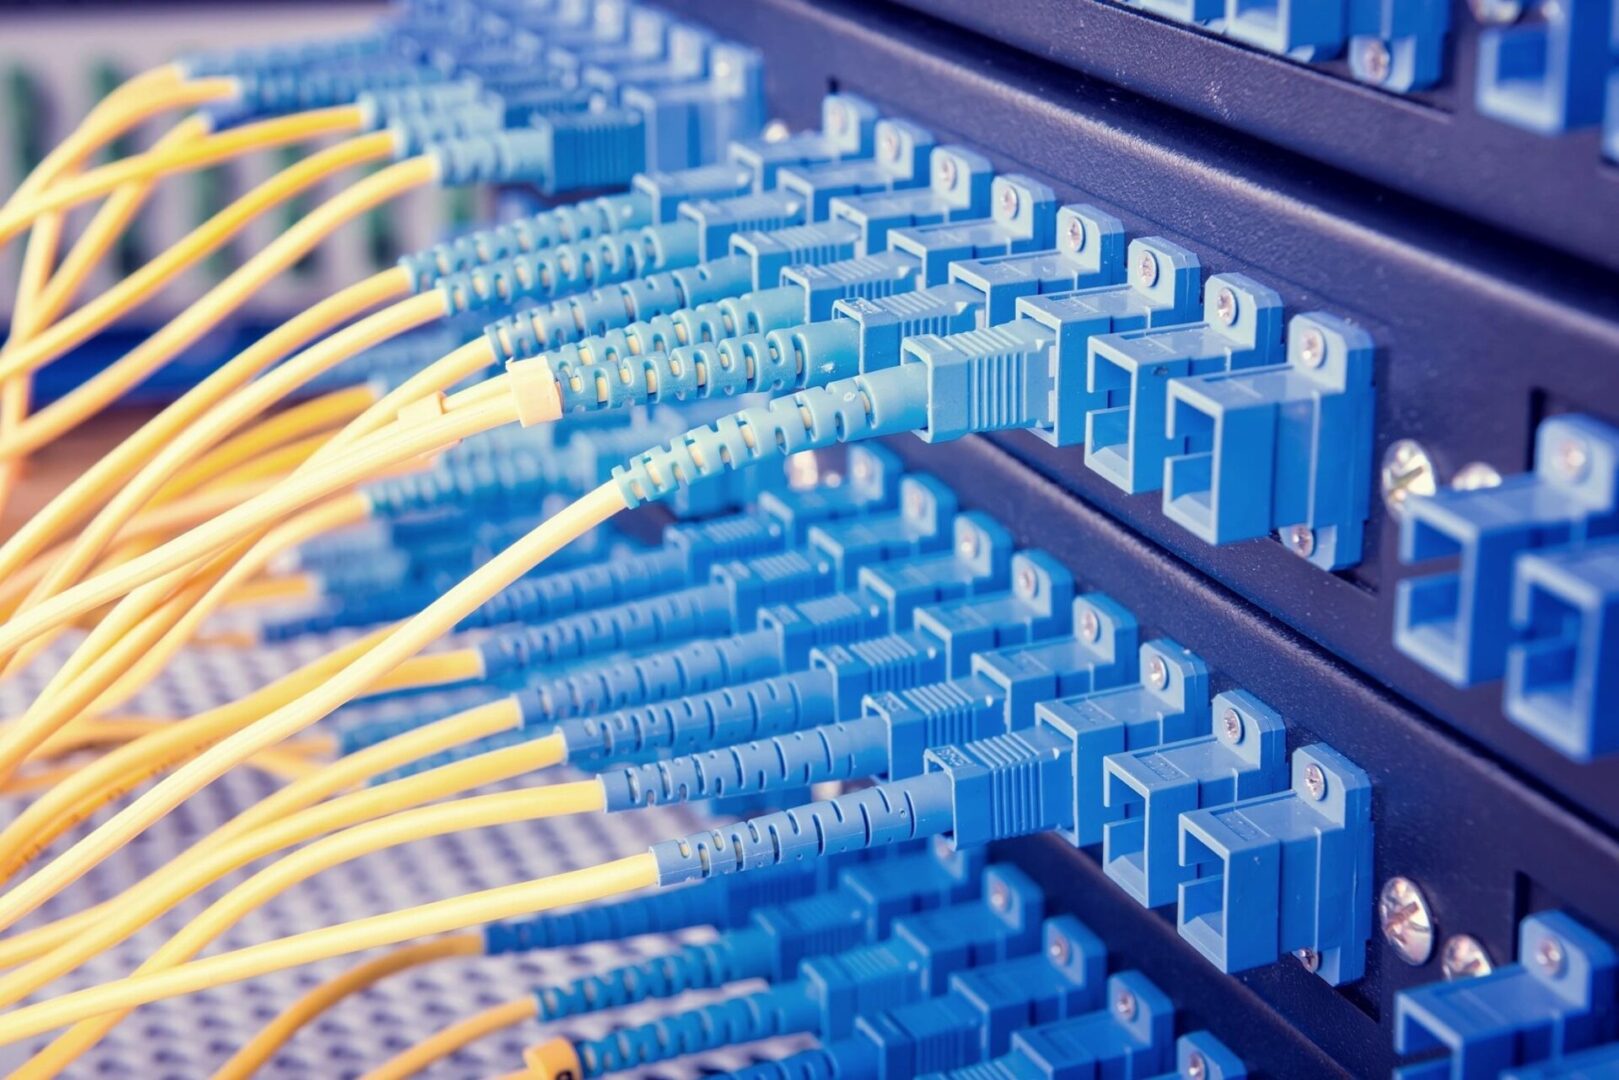 Fiber optic cable in Technology center with fiber optic equipment